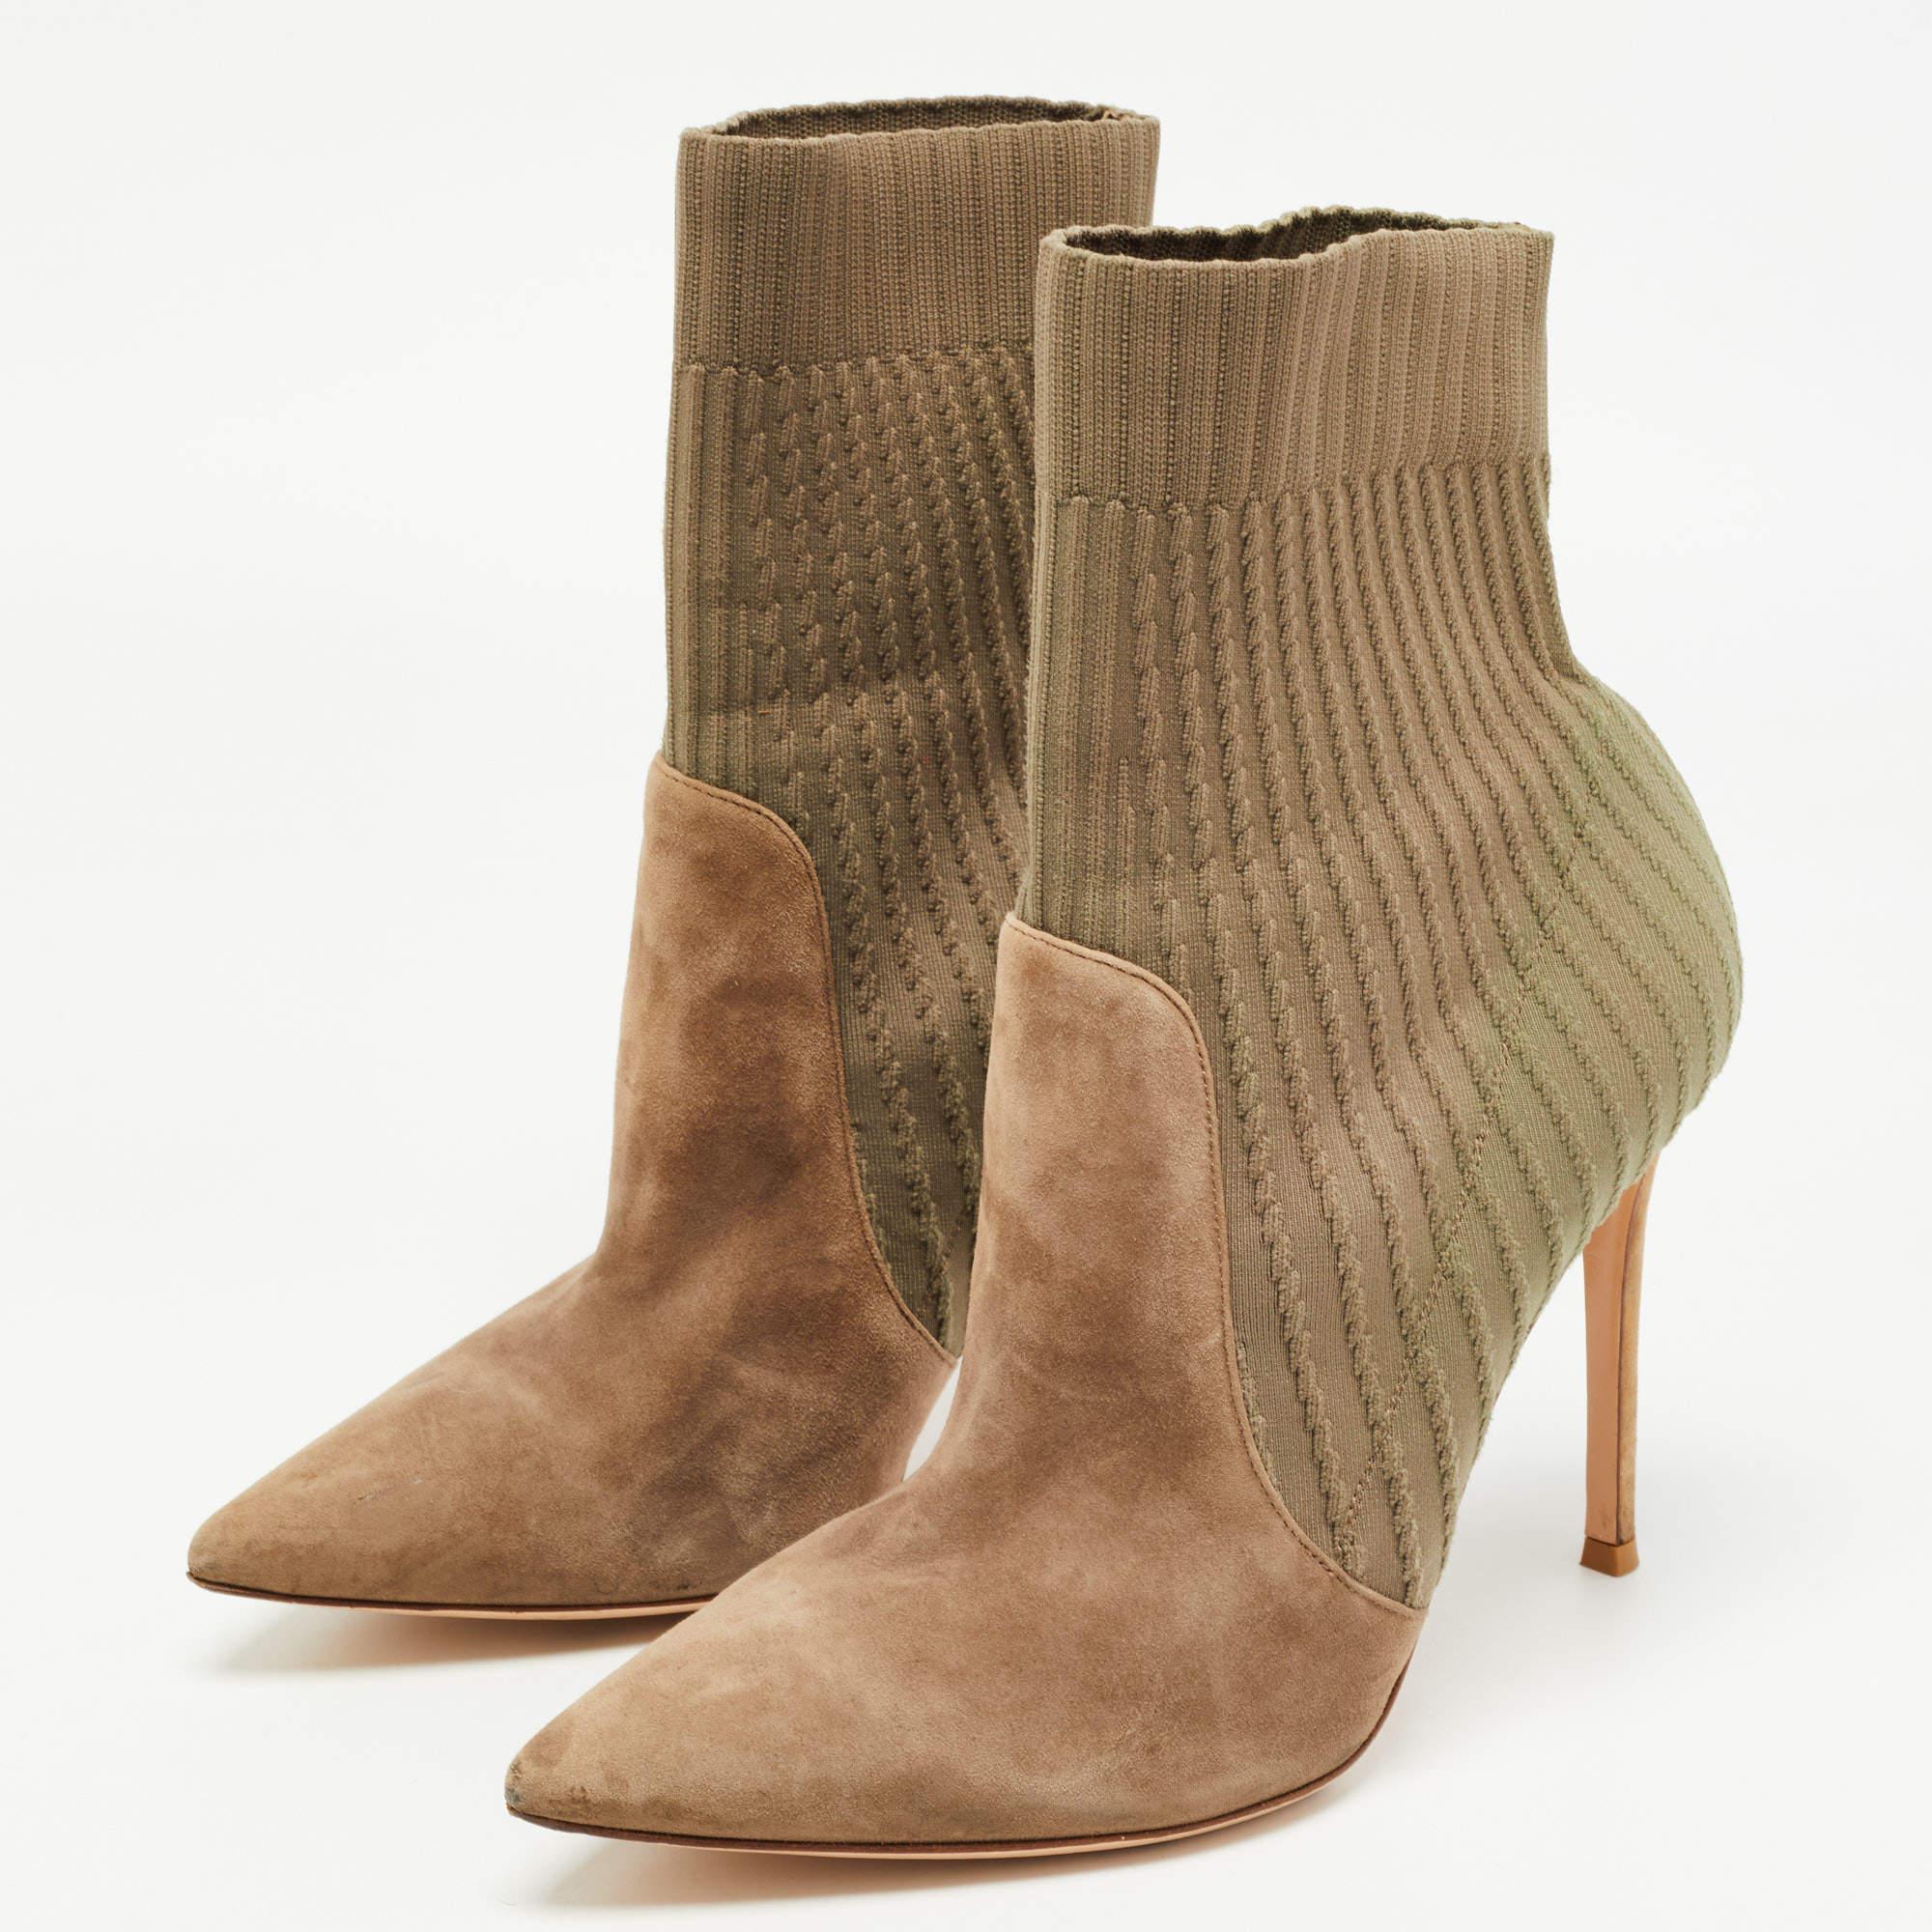 Gianvito Rossi Two Tone Knit Fabric and Suede Katie Ankle Booties Size 40.5 In Good Condition For Sale In Dubai, Al Qouz 2